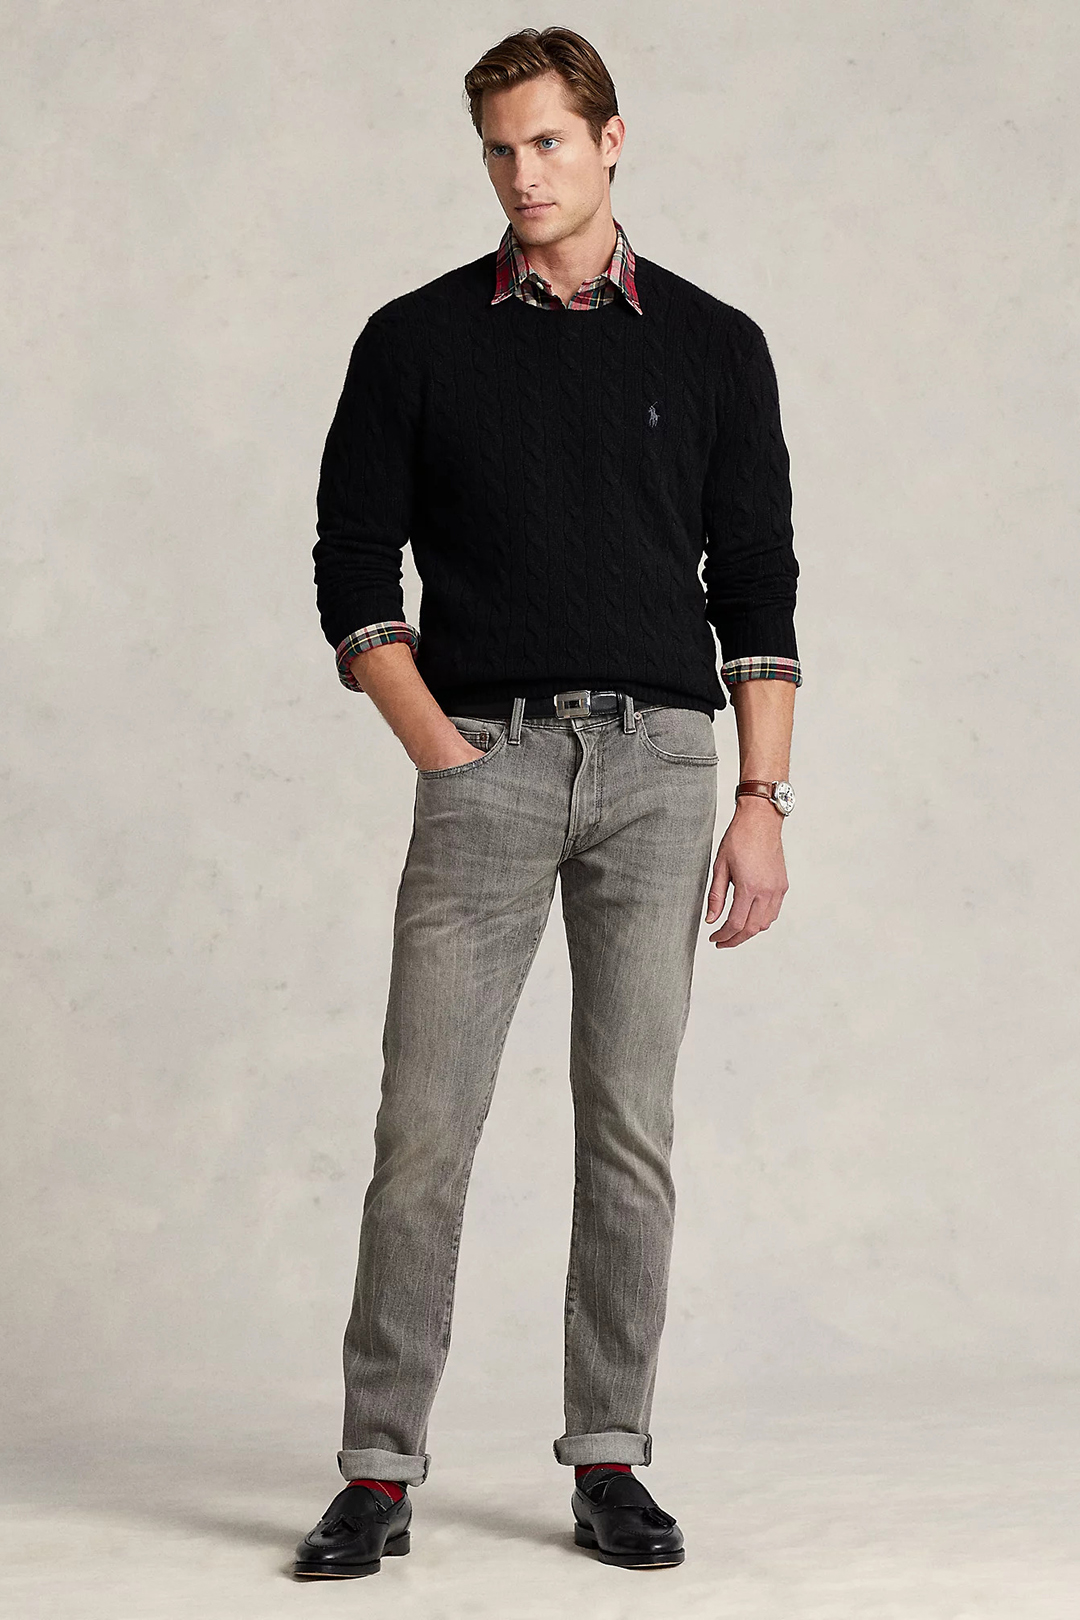 Black sweater over multi-color plaid shirt, gray jeans, and black tassel loafers outfit